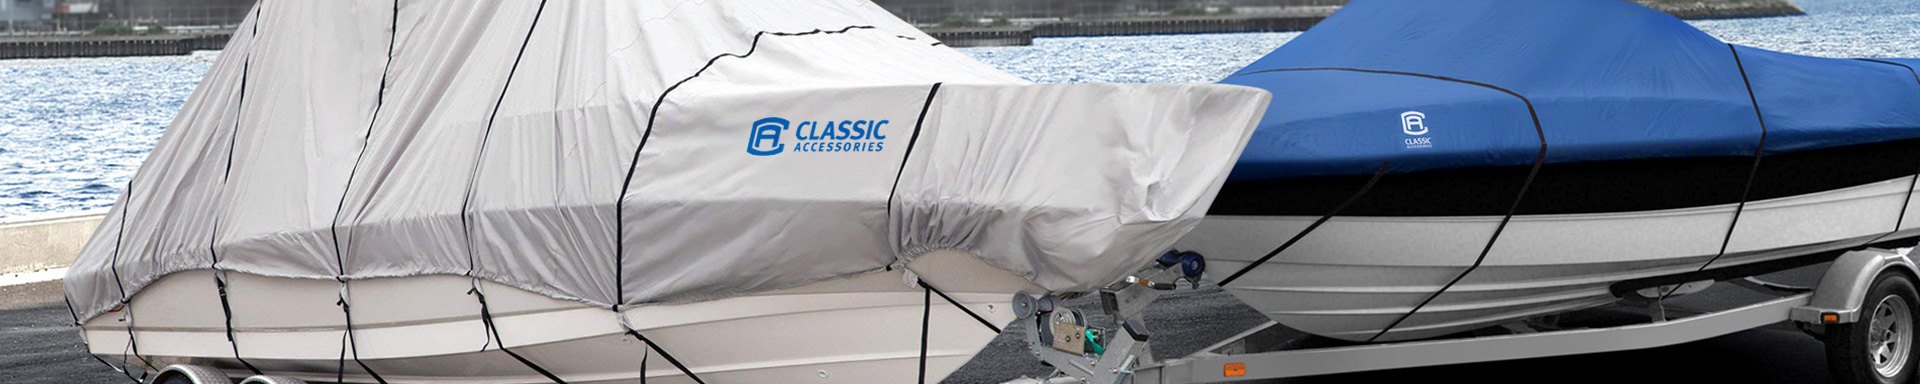 Classic Accessories Inflatable Boats & Parts